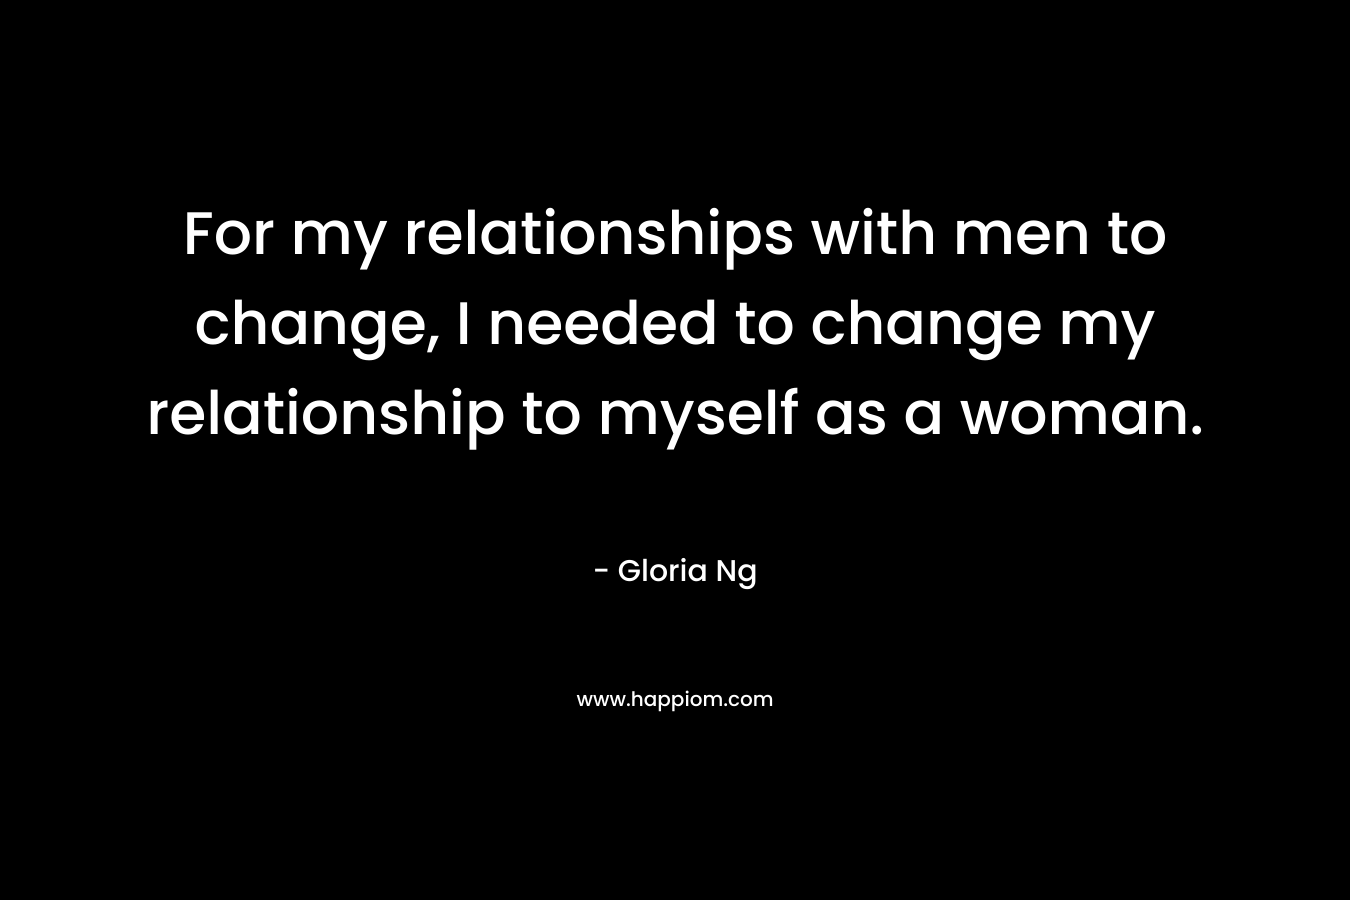 For my relationships with men to change, I needed to change my relationship to myself as a woman. – Gloria Ng